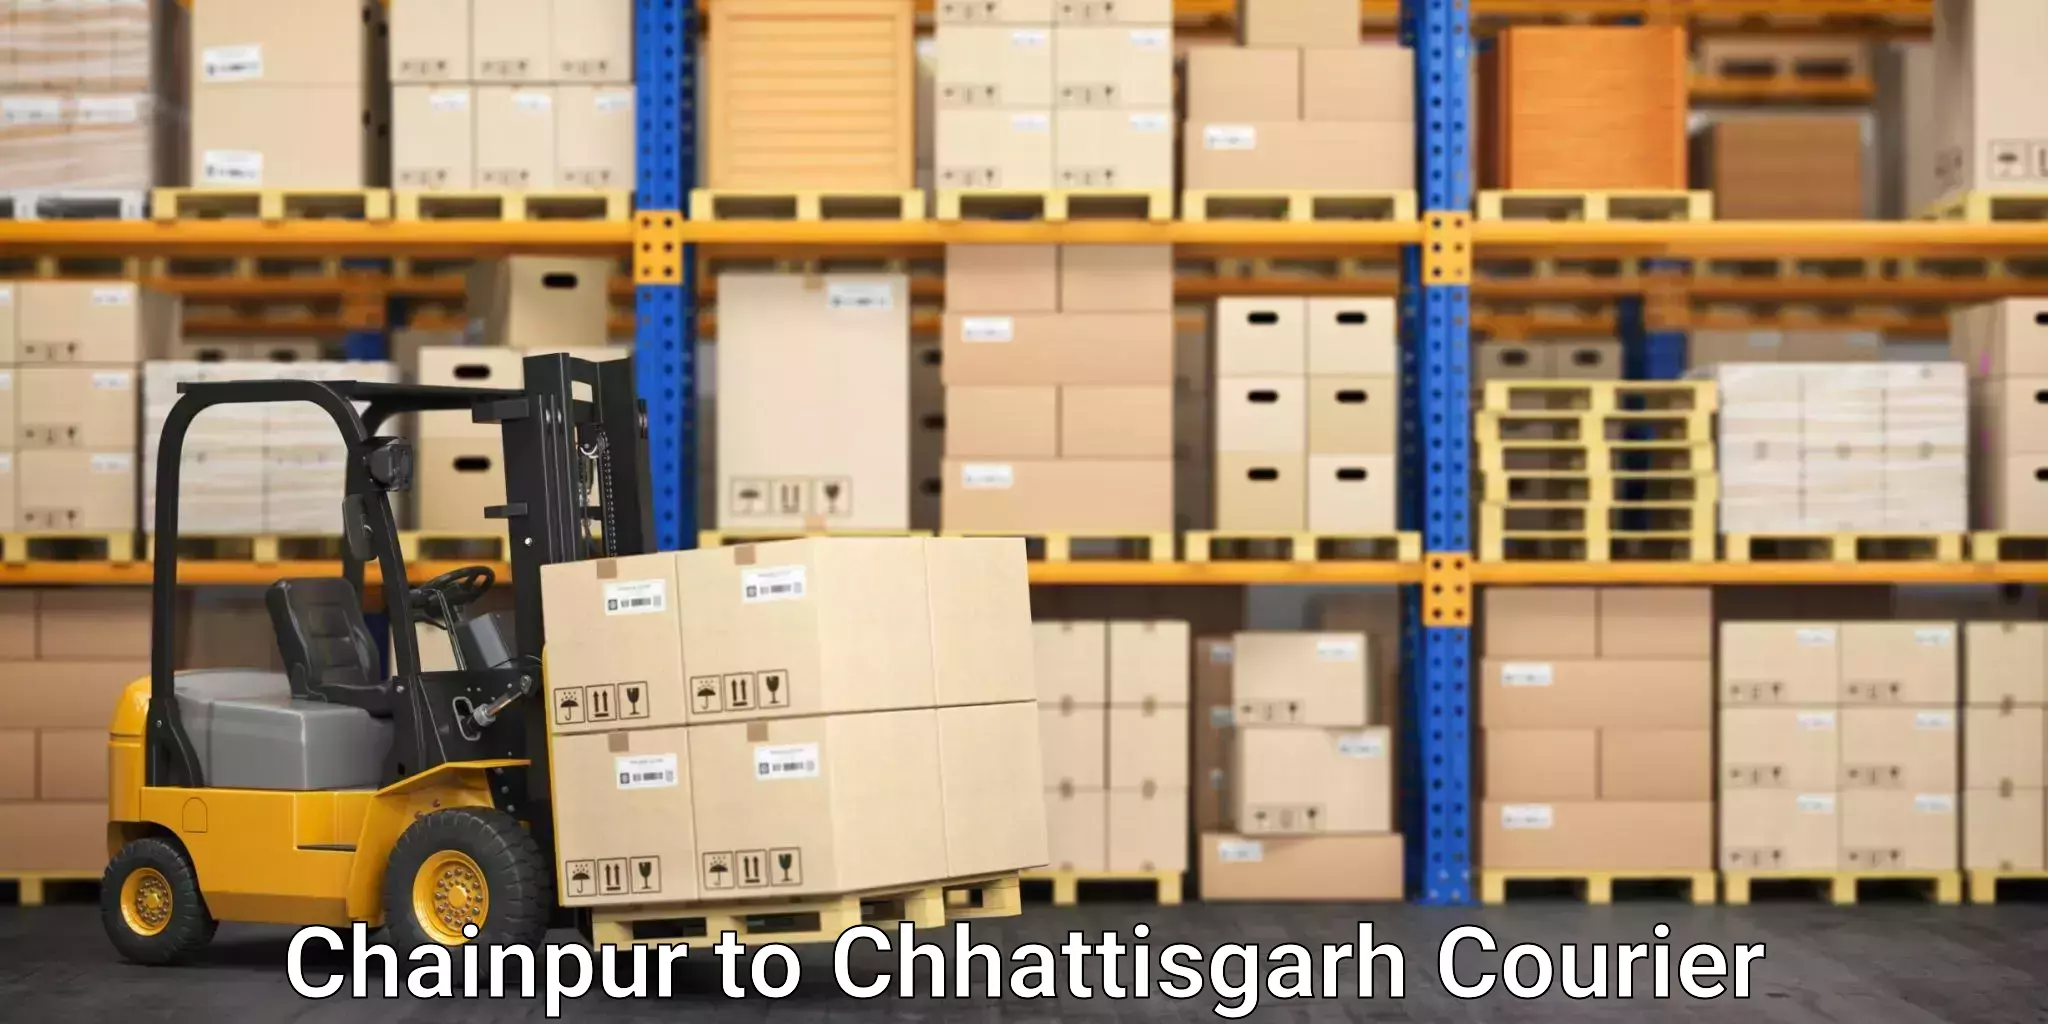 Furniture transport service Chainpur to Ratanpur